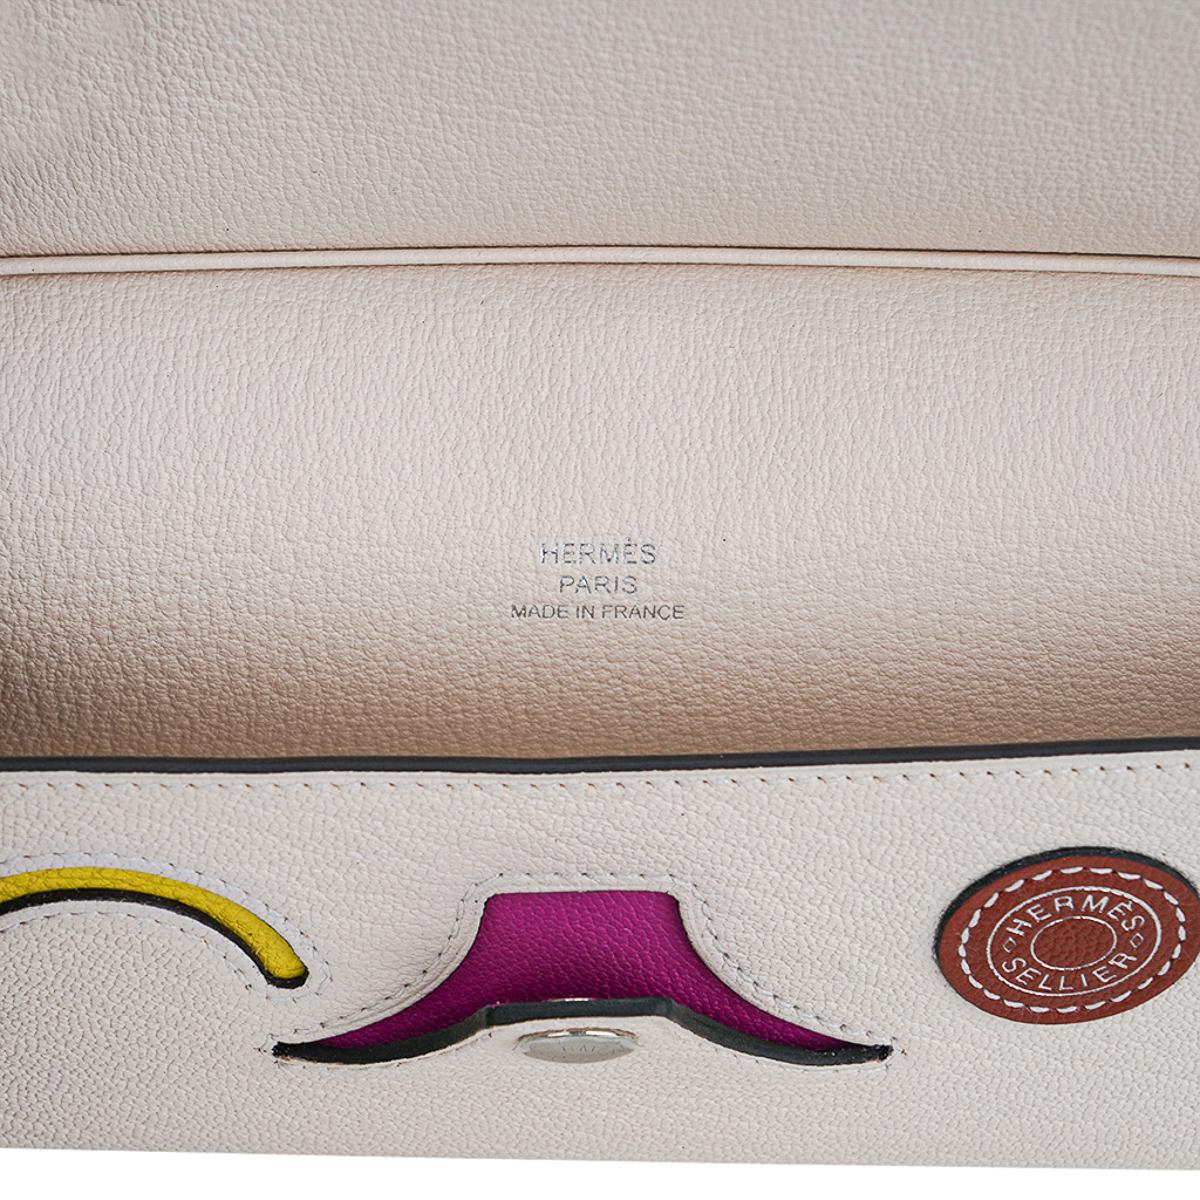 Hermes In The Loop Wink Glasses Case Nata / Magnolia Chevre Leather For Sale 5